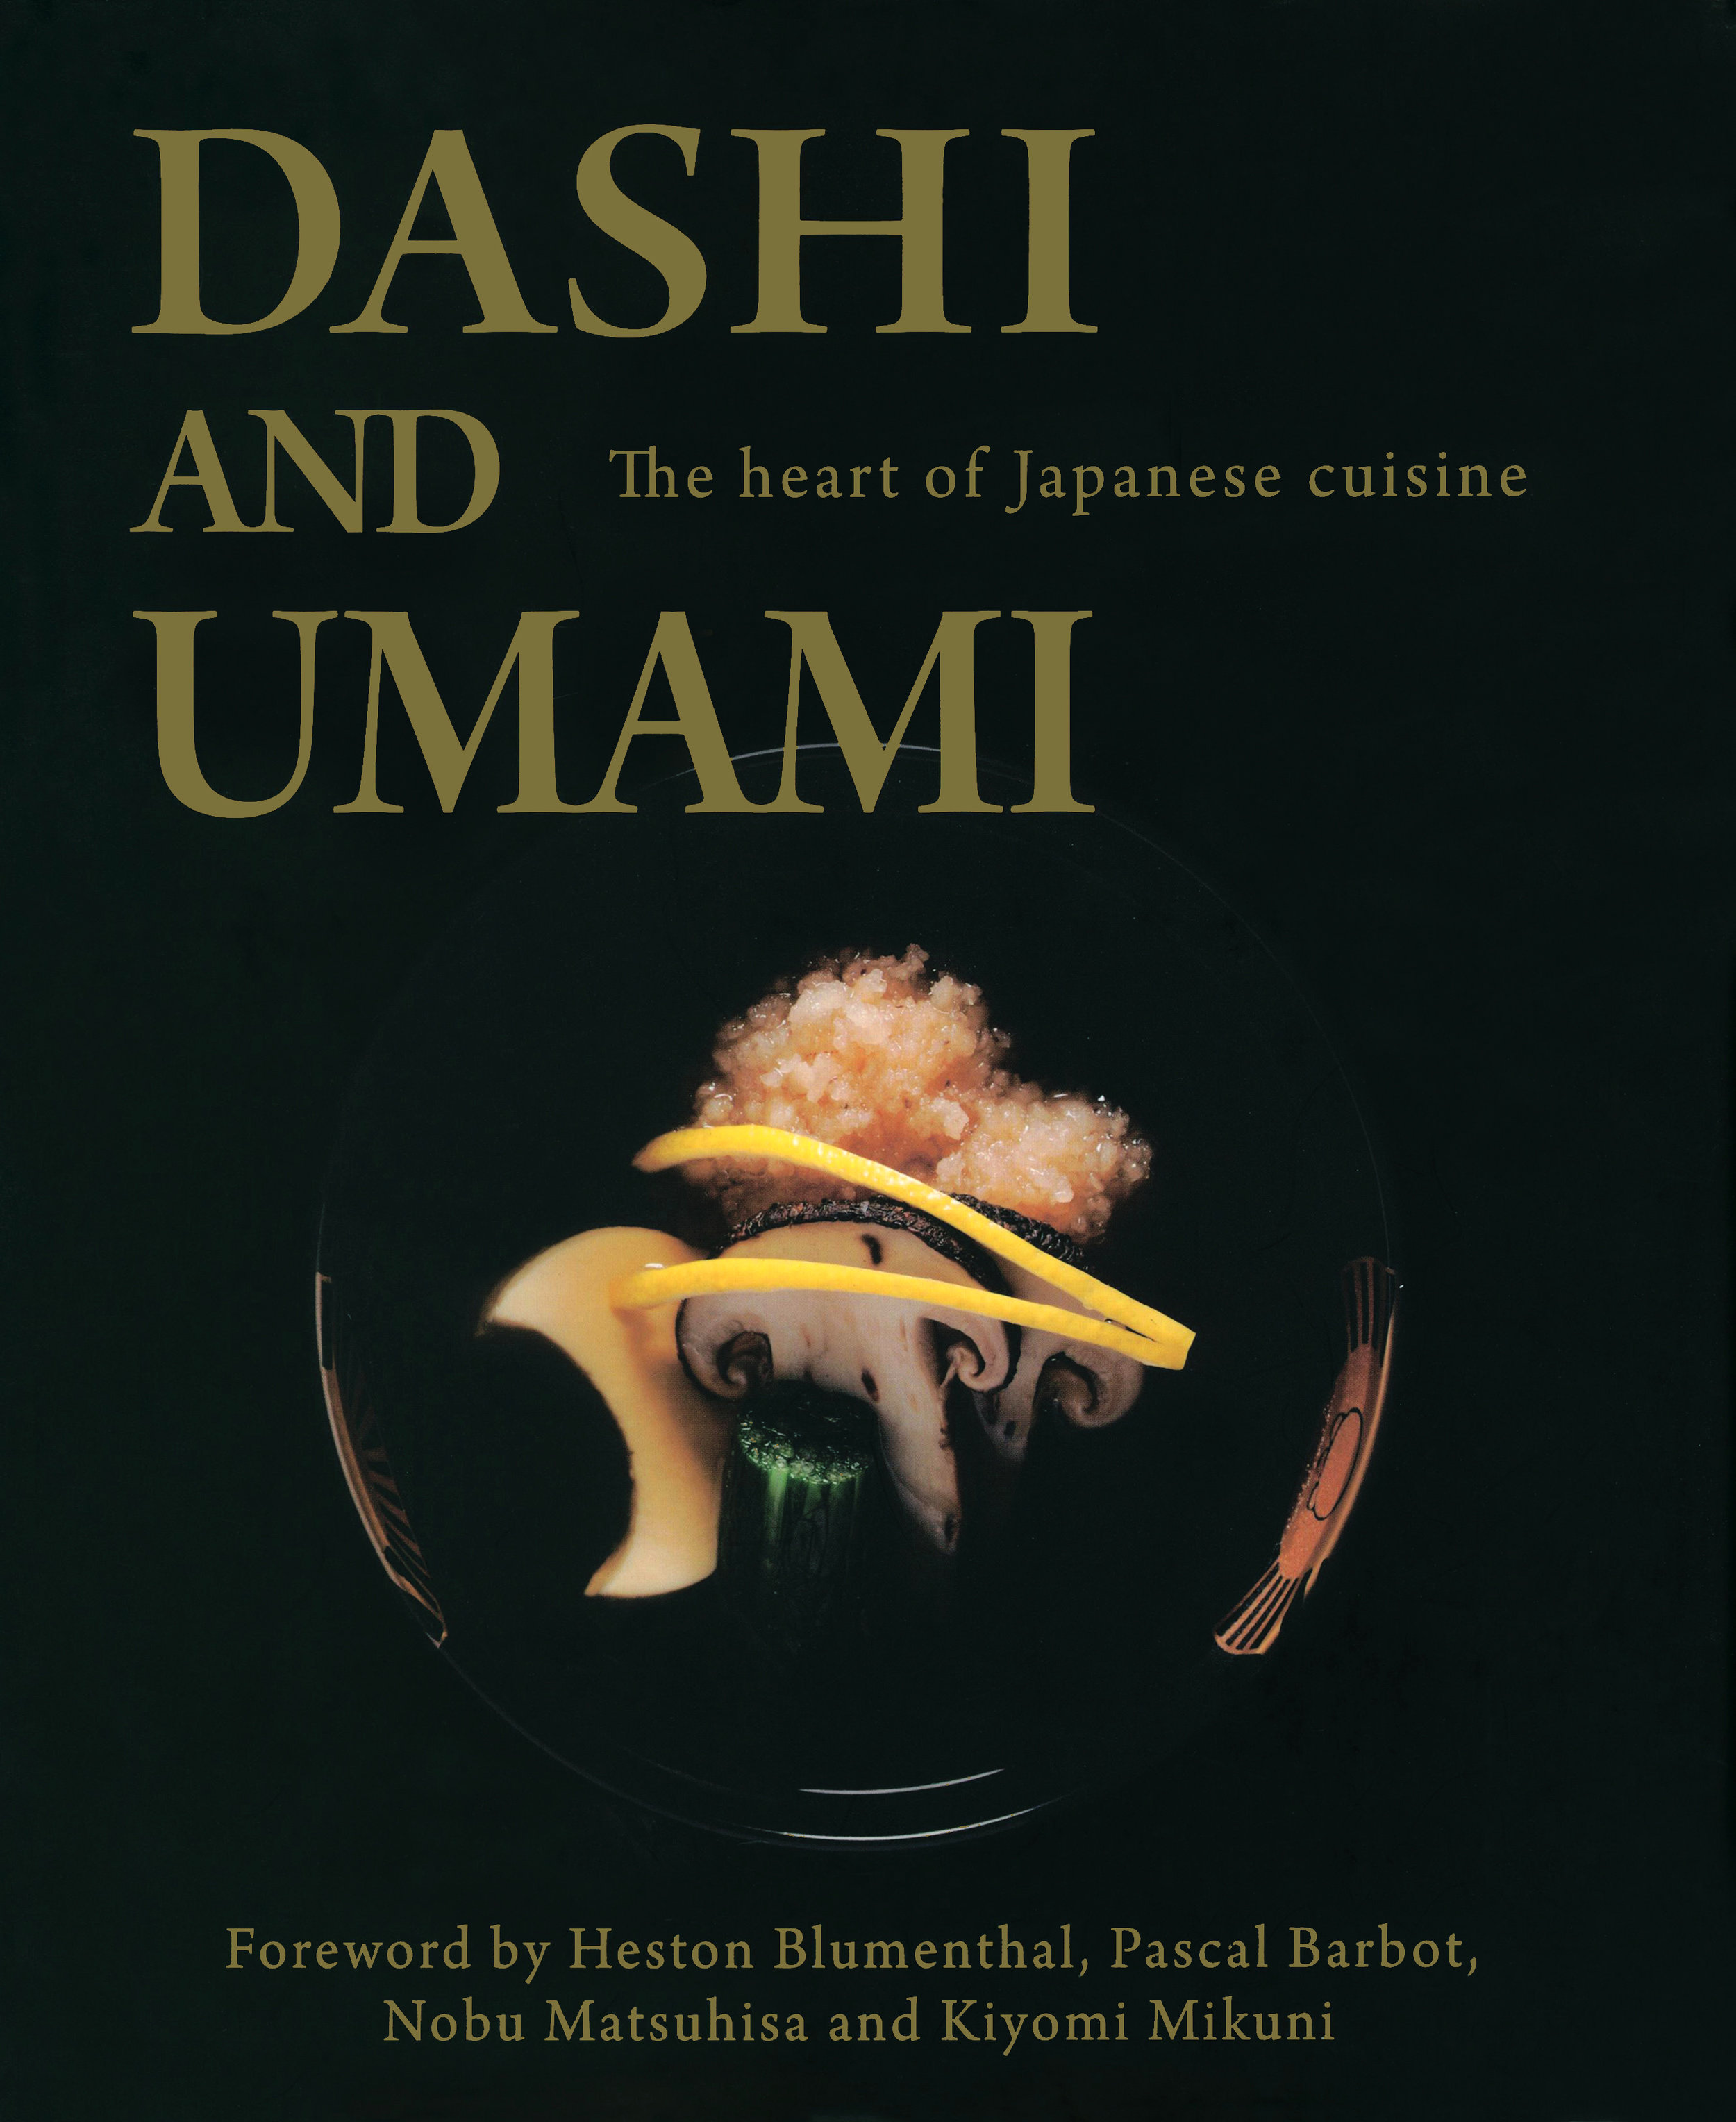 Lisa Gershenson on the indelible lessons learned from Dashi and Umami